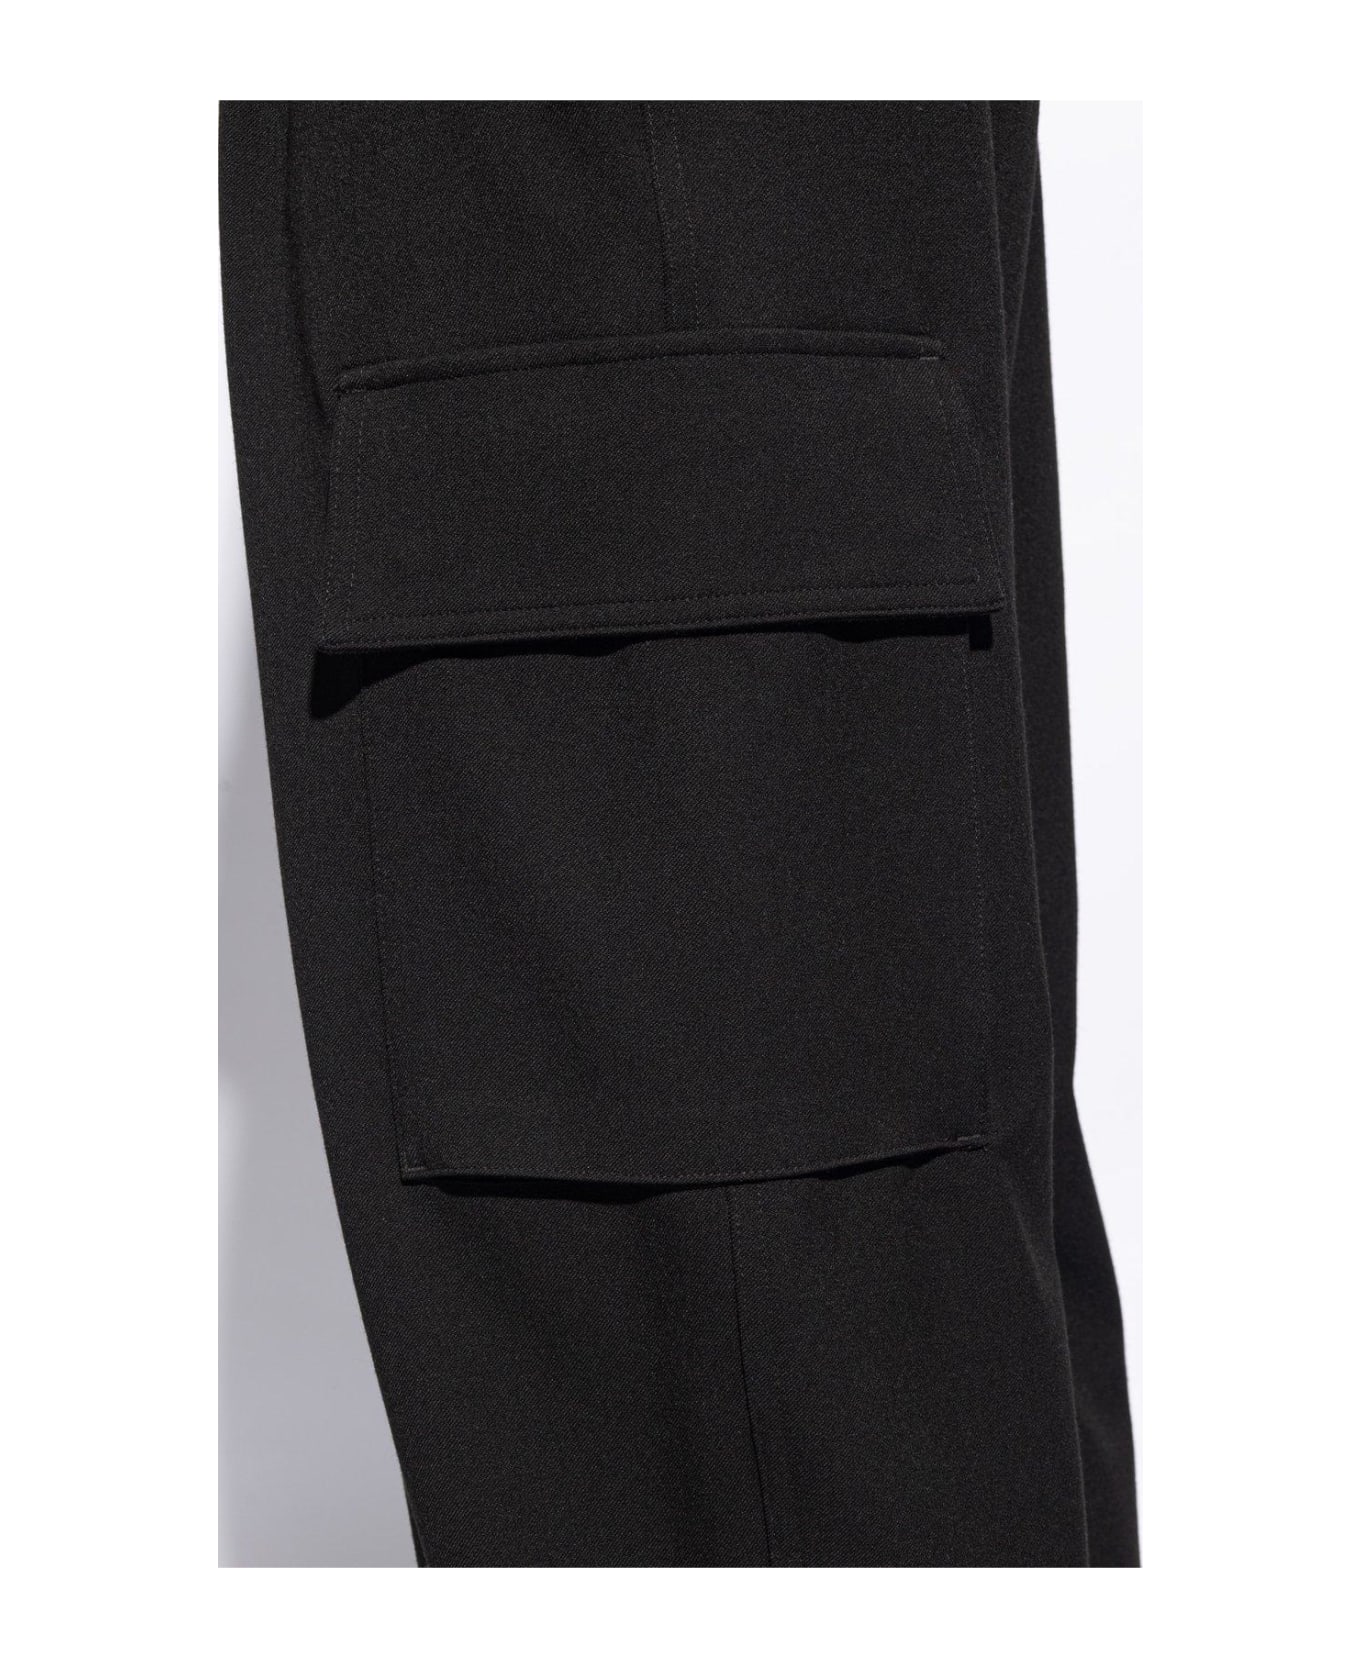 Emporio Armani Trousers With Pockets - Black